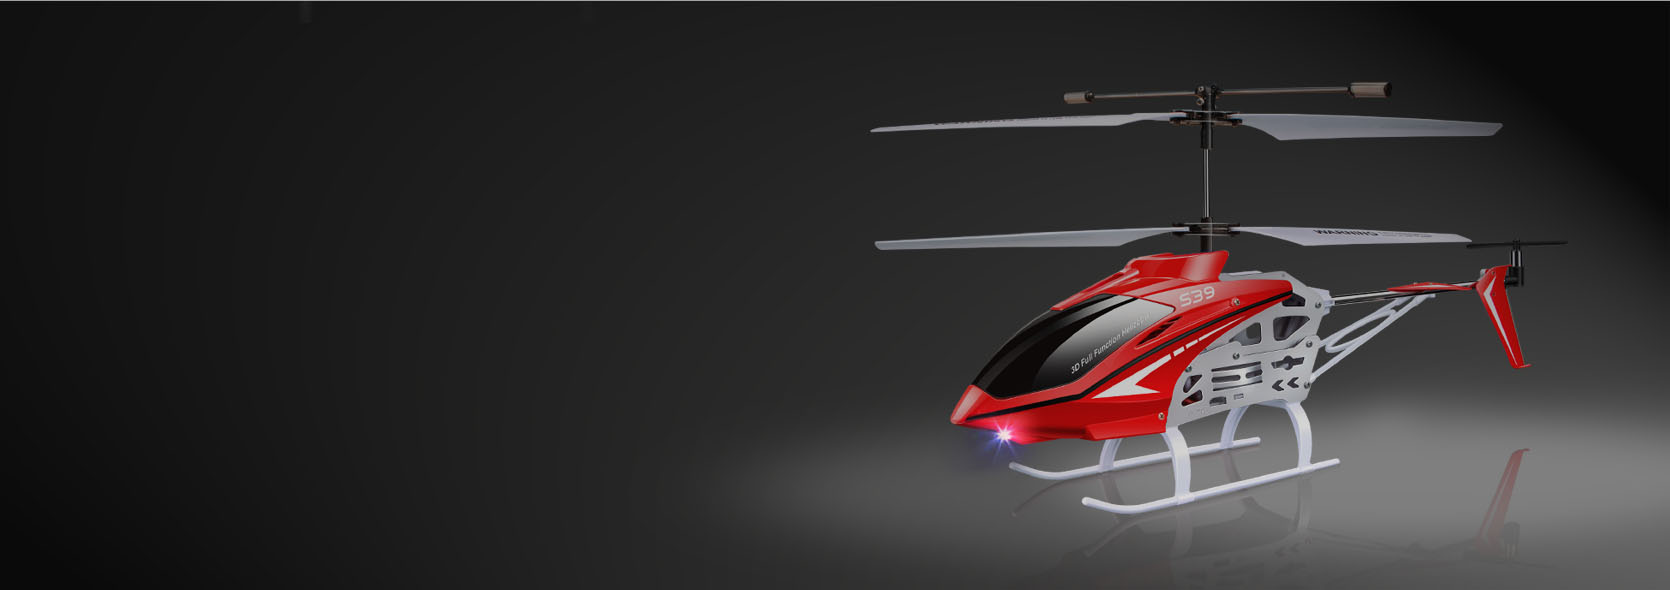 syma s39 helicopter